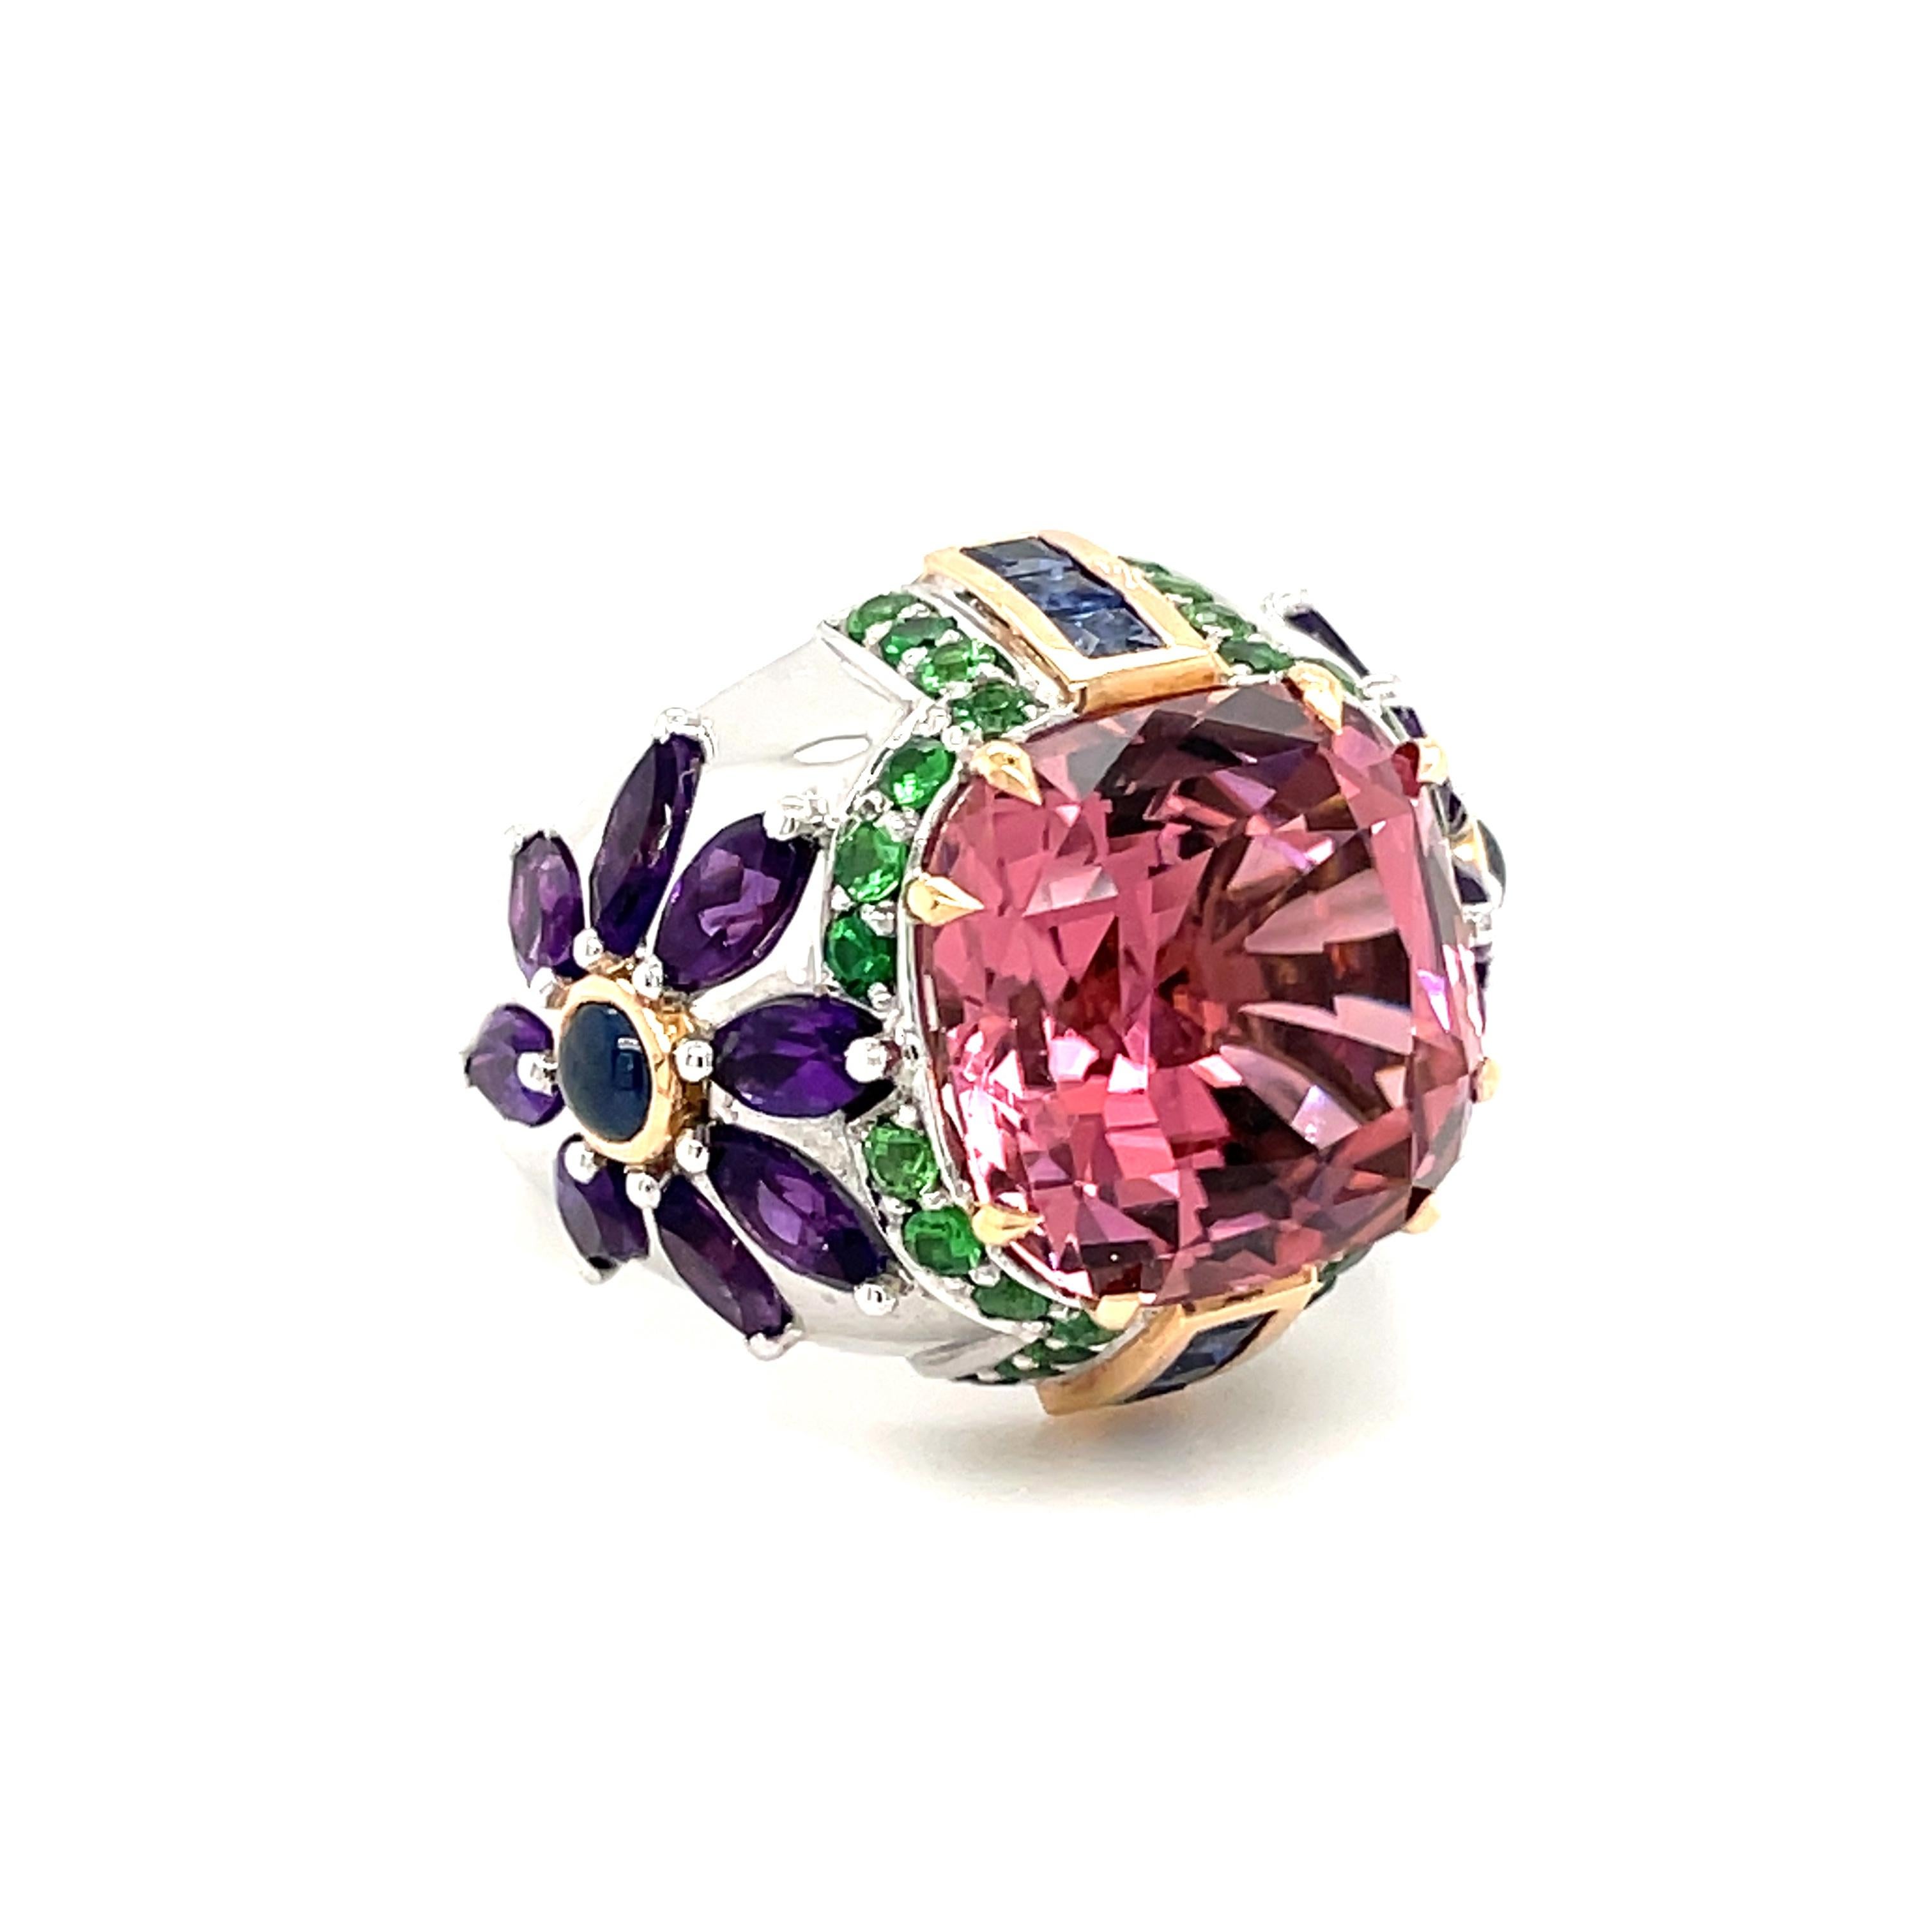 Women's or Men's 10.51ct Tourmaline Cocktail Ring with Garnets, Sapphires & Amethyst by Musson For Sale